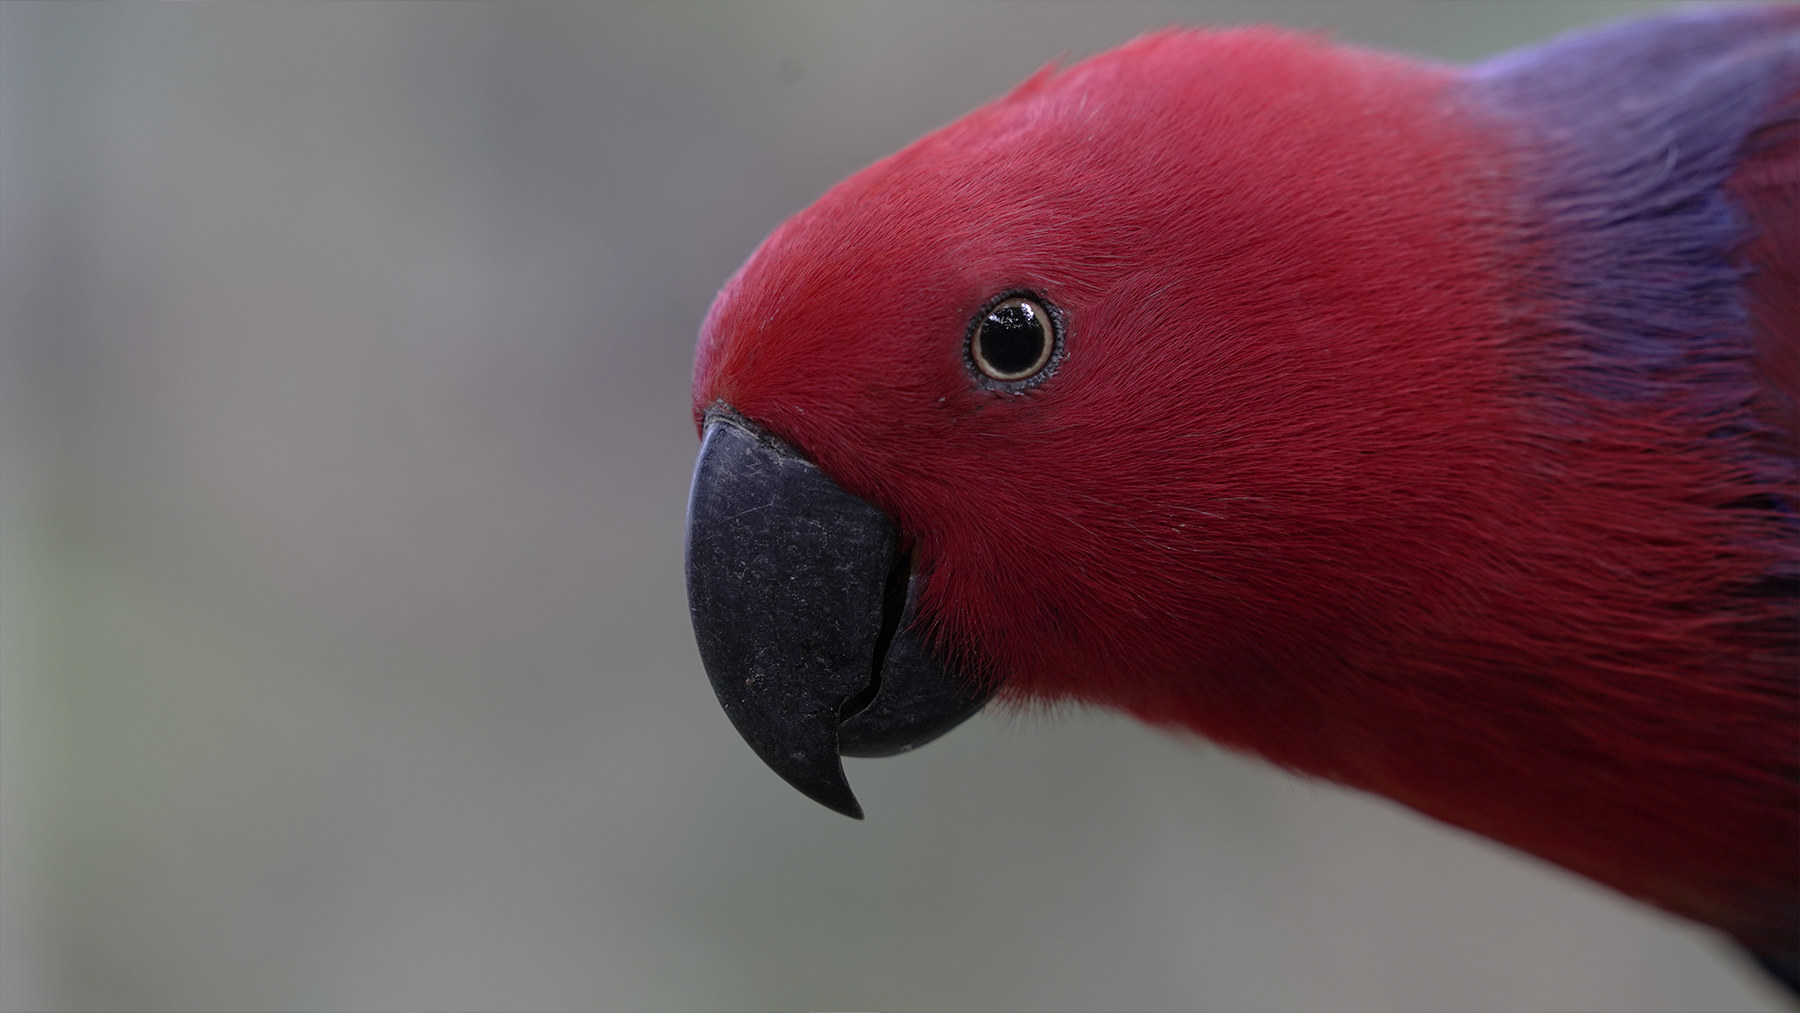 The Eclectus parrot